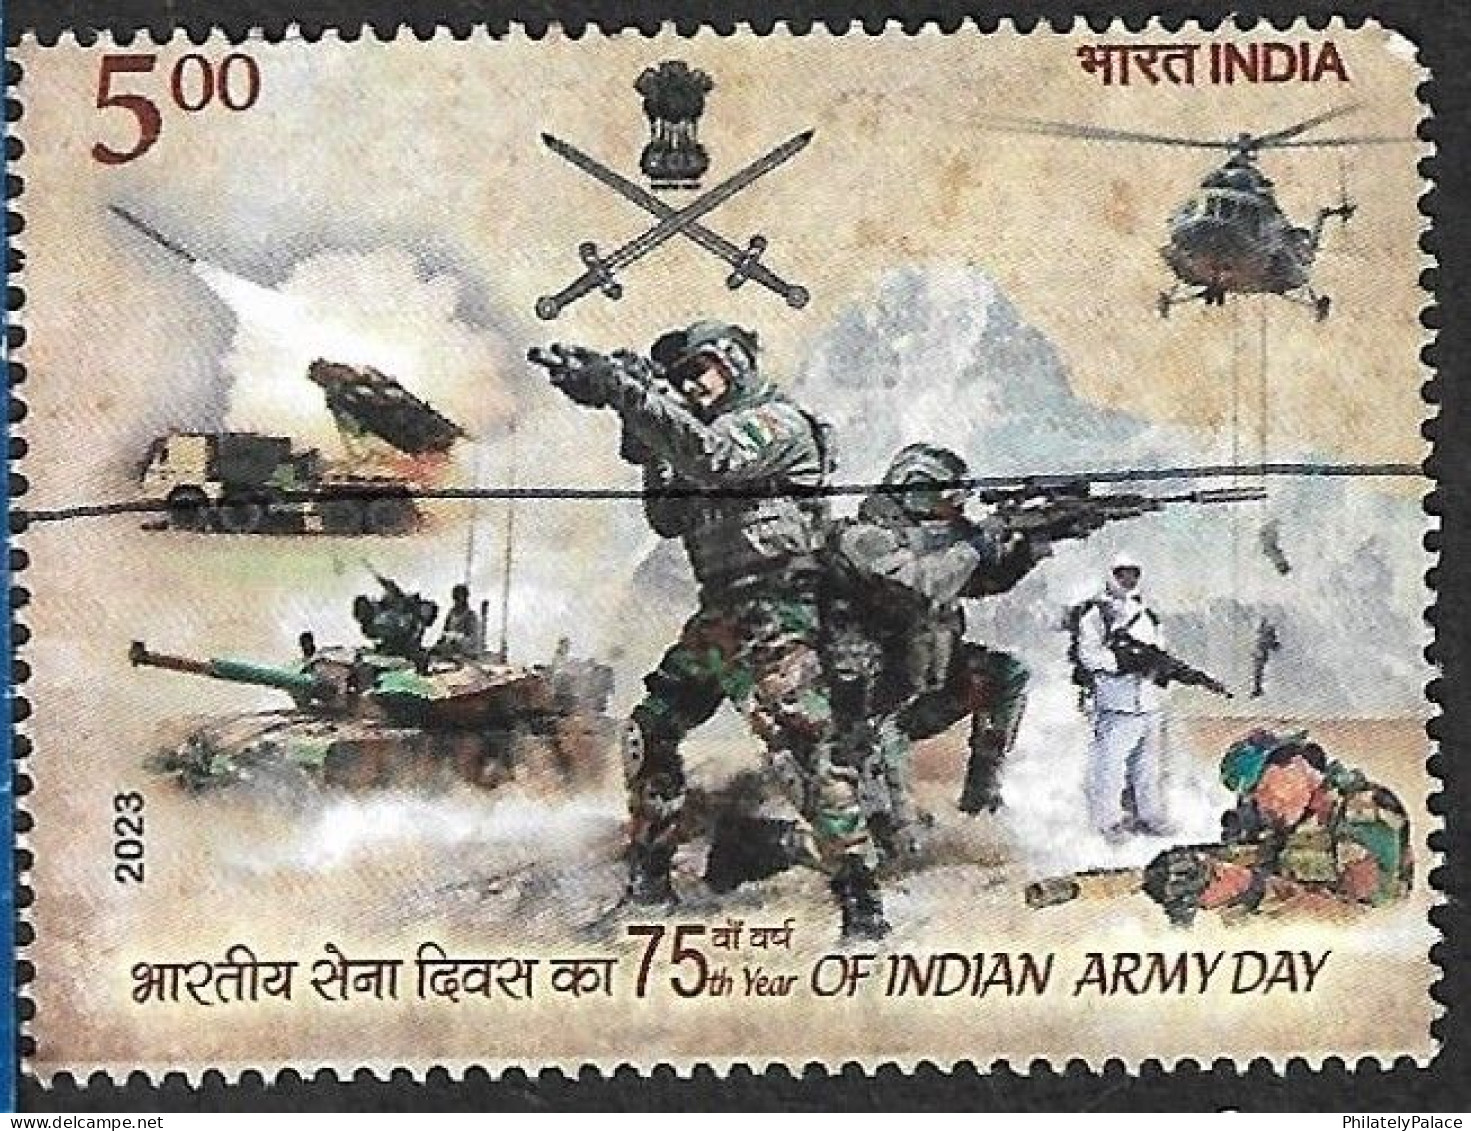 India 2023 Army,Helicopter,Arjun Tank MK III,Gun,Sword,Sniper,Paratroopers,Rocket, War Used PEN Cancelled, Inde Indien - Oblitérés